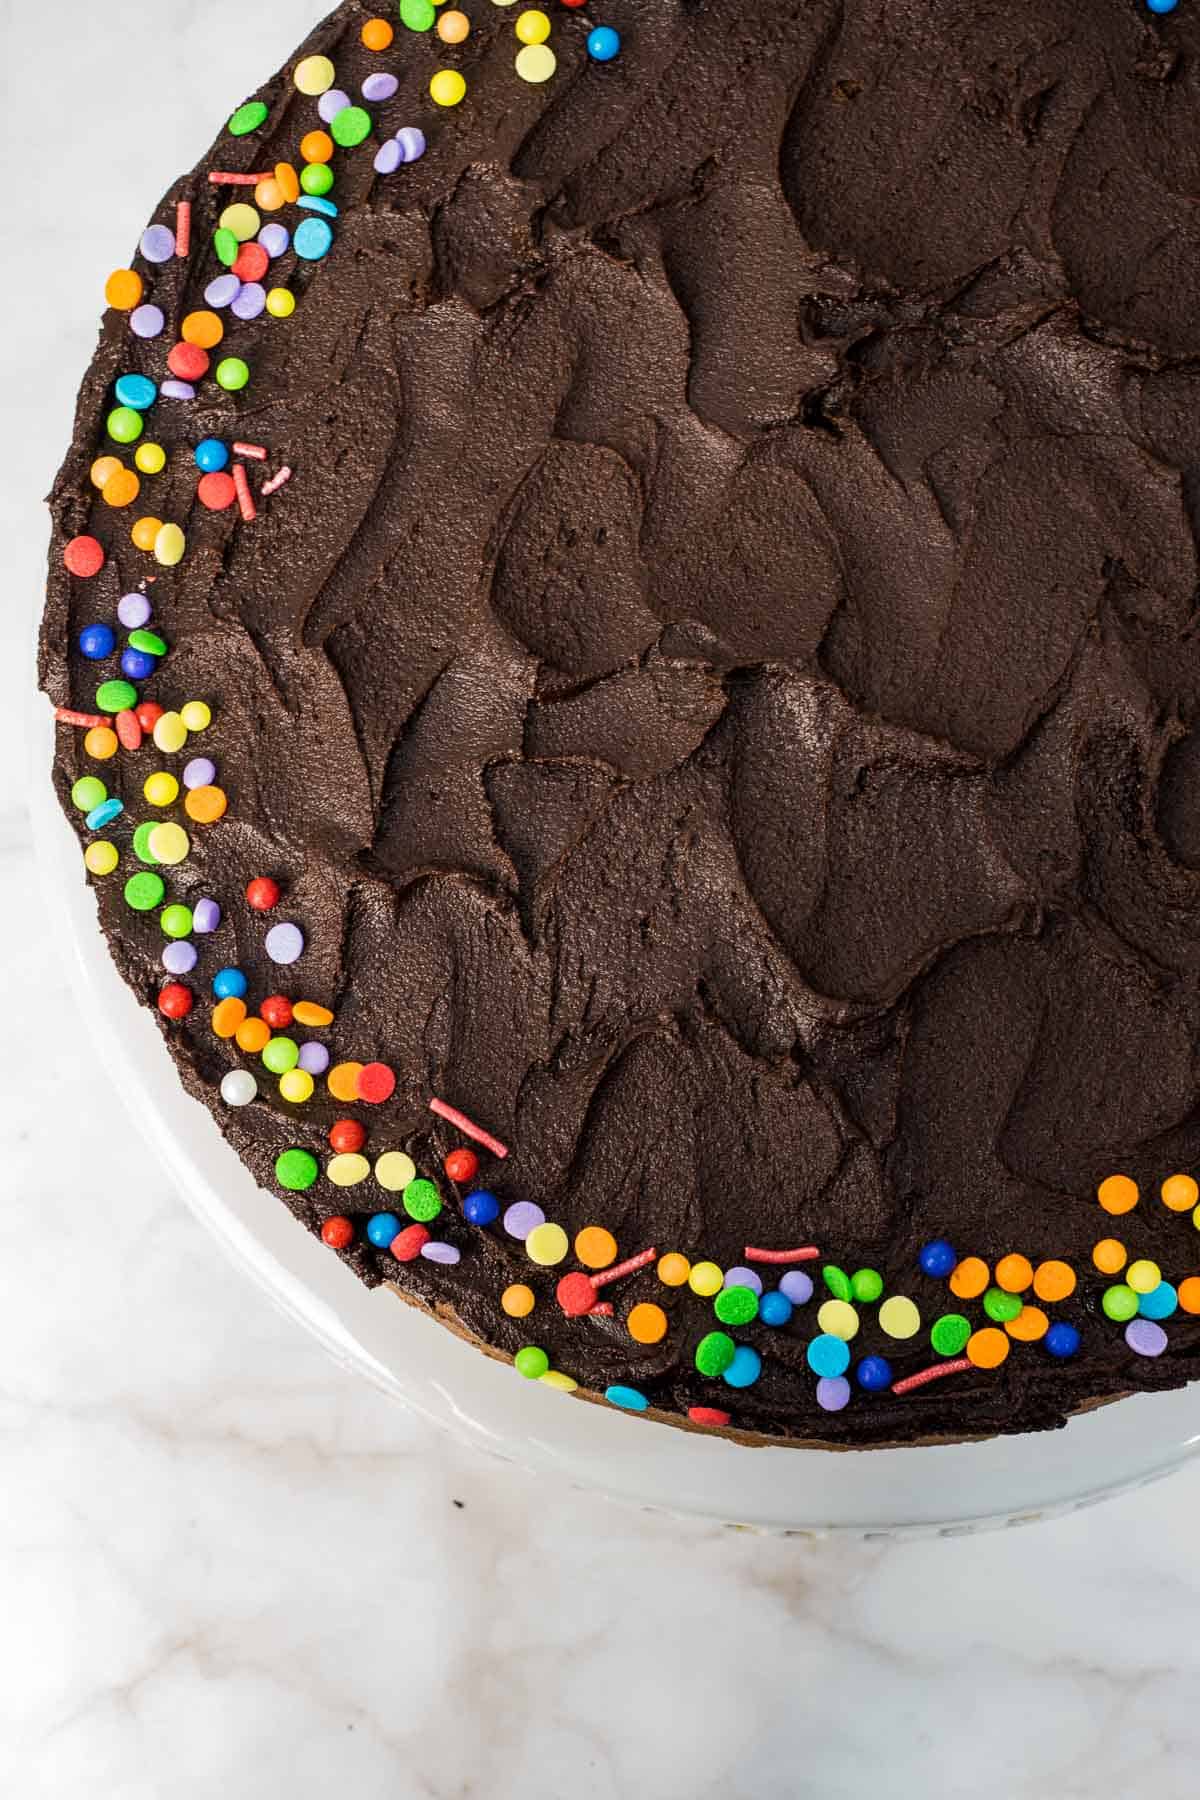 Close up of a round chocolate cake covered in chocolate icing and decorated with colorful sprinkles on the edges.